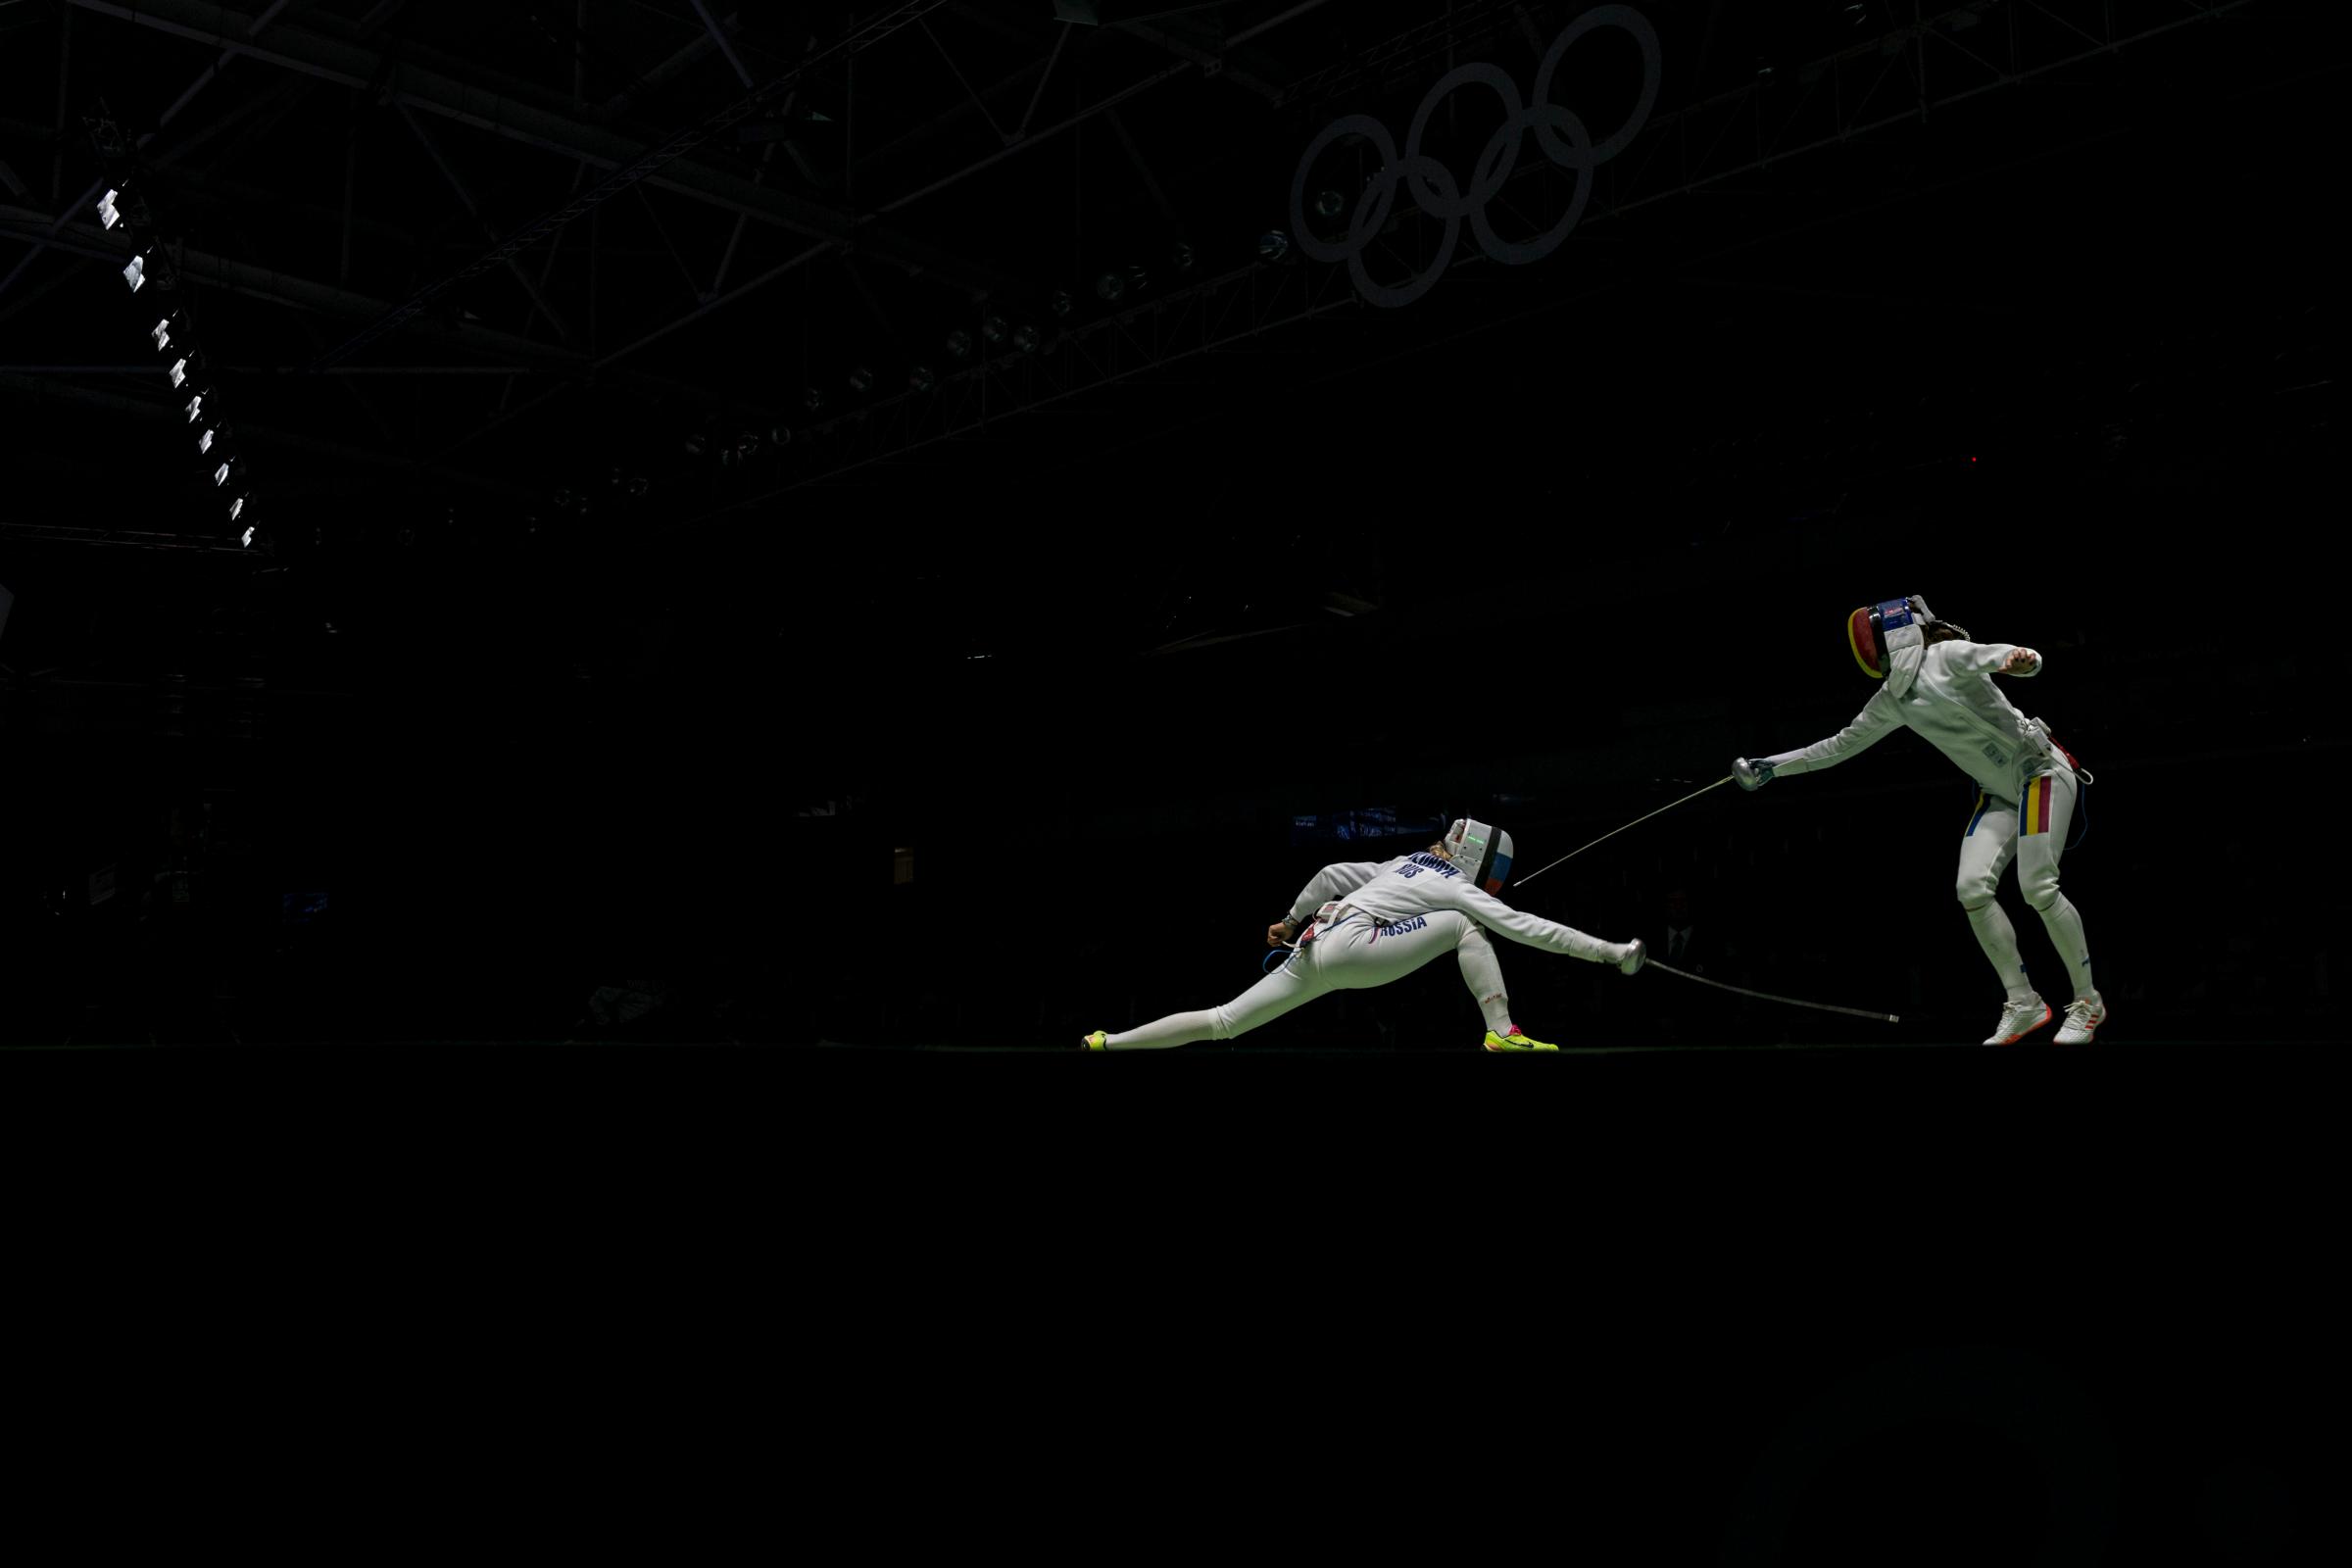 Violetta Kolobova of Russia, left, vies with Simona Pop of Romania in the women's epee team fencing semifinal at the Carioca Arena 3 during the 2016 Summer Olympics in Rio de Janeiro.